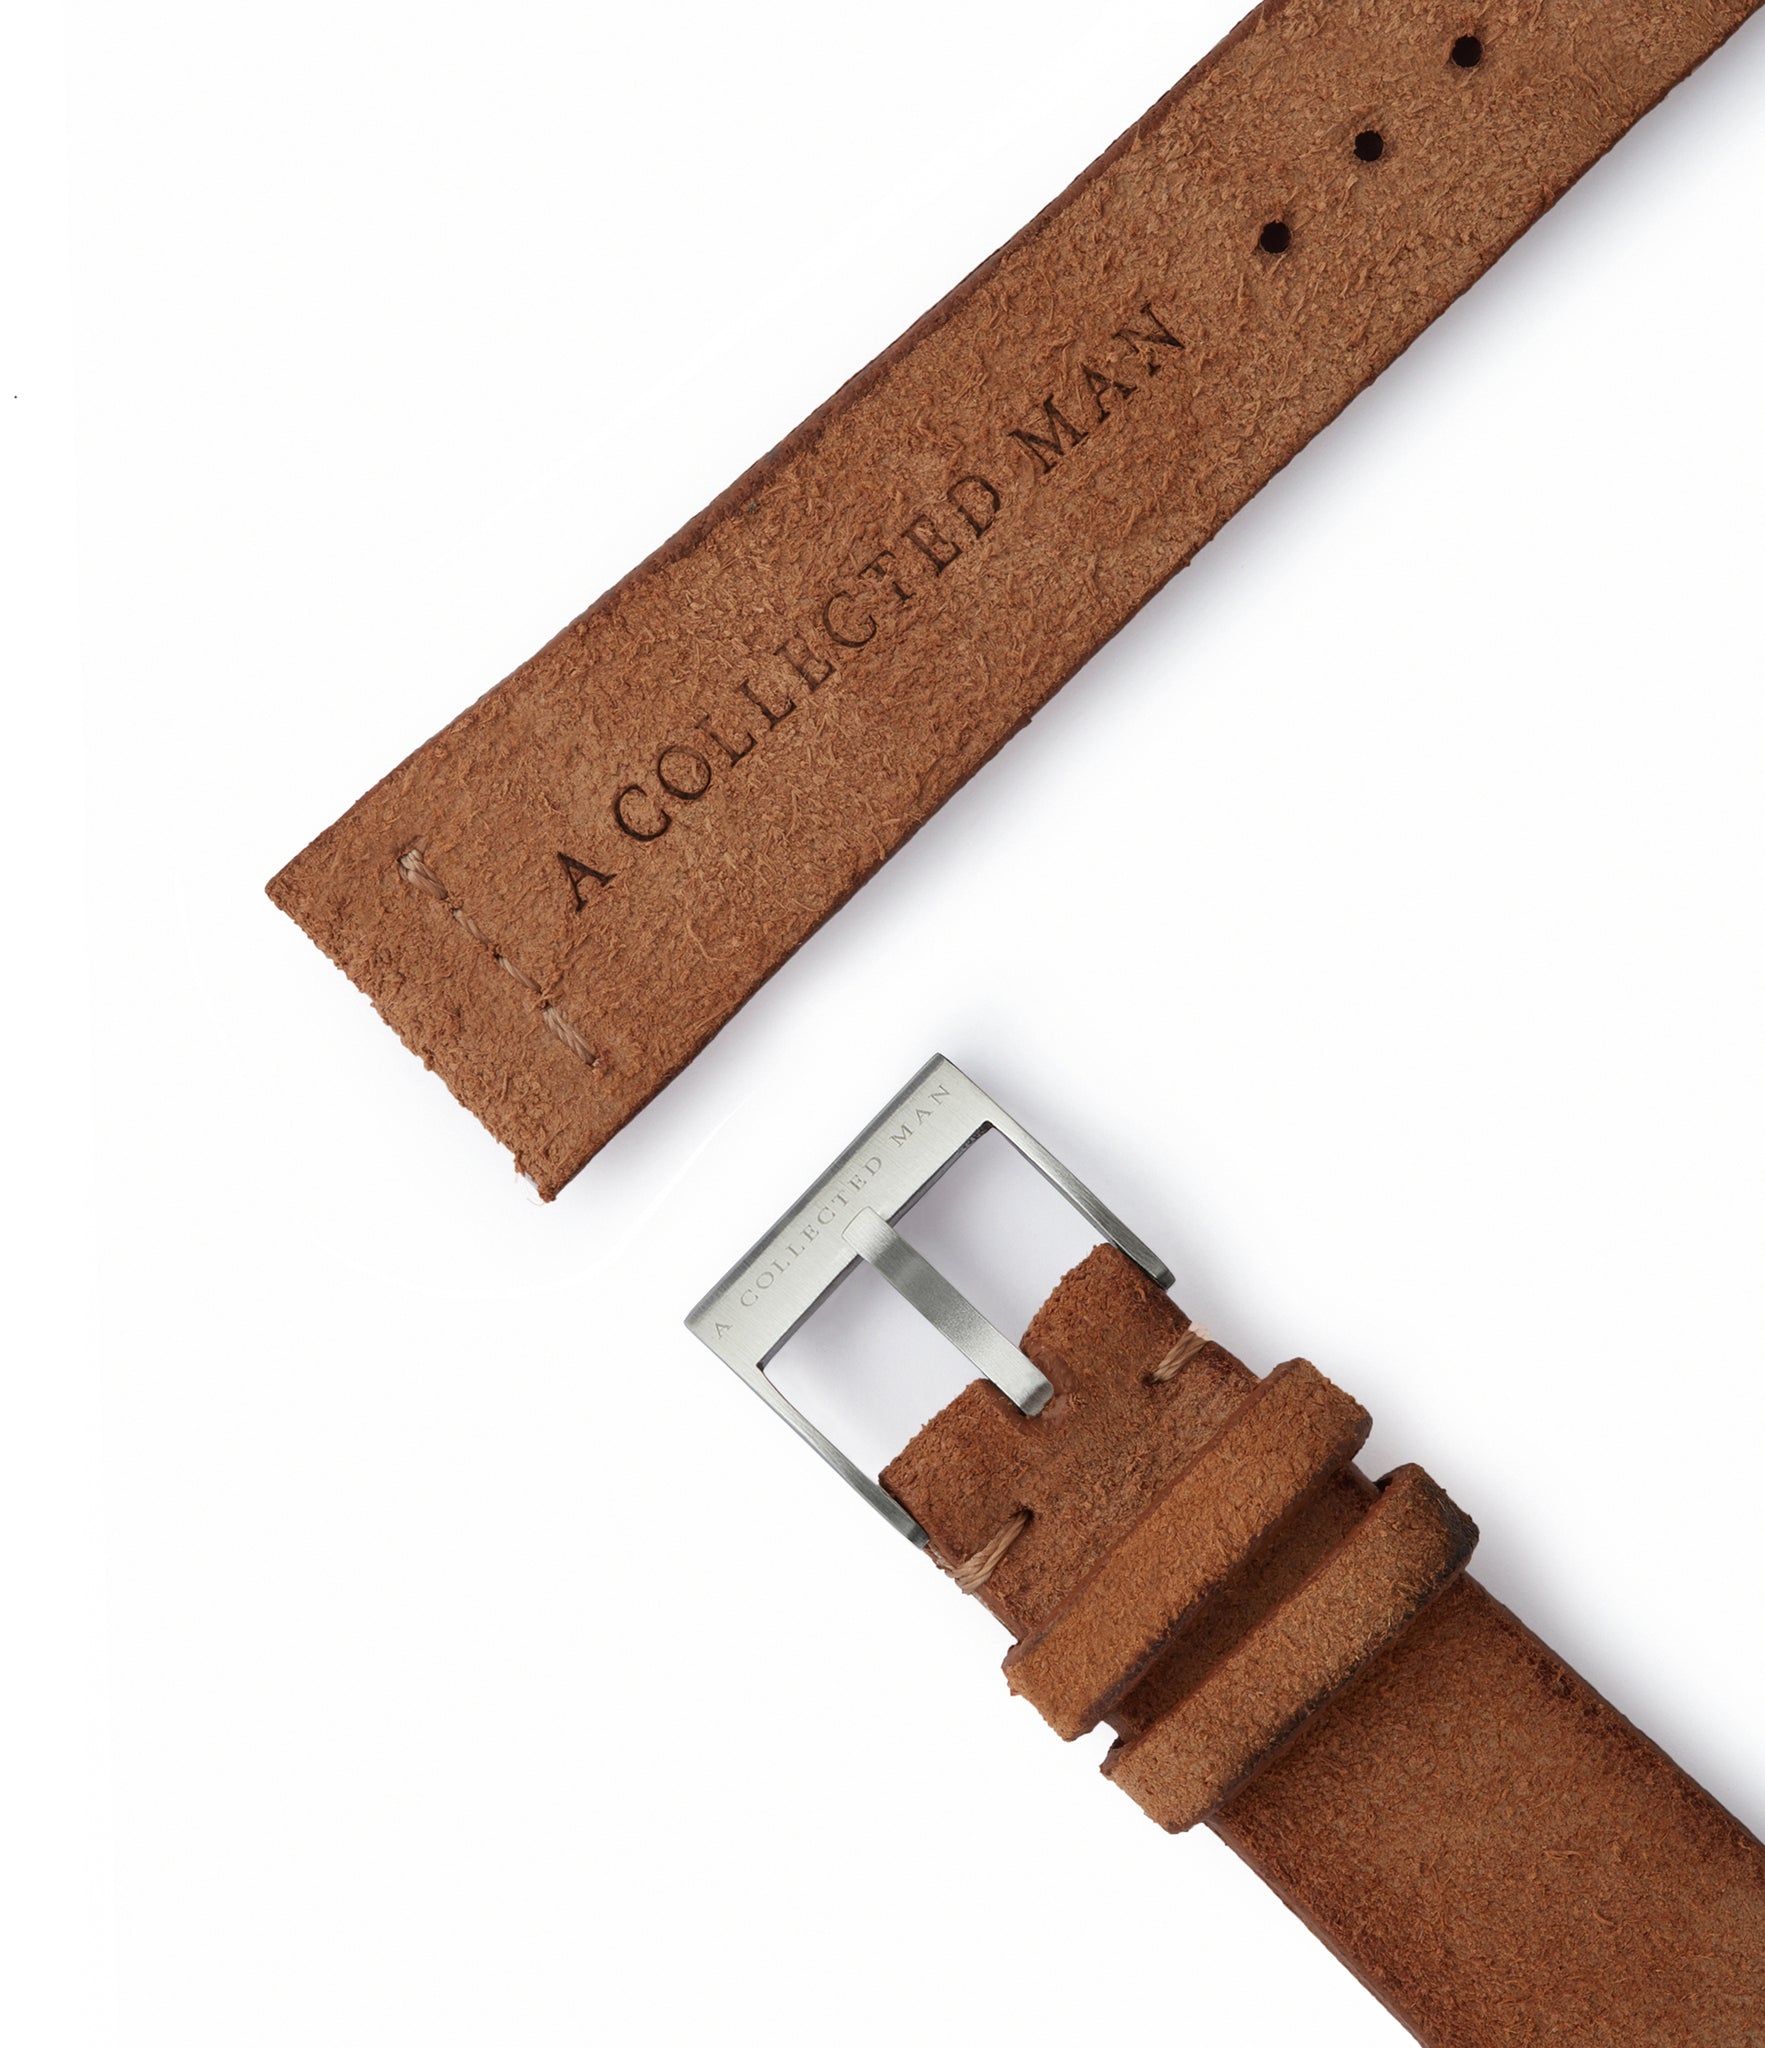 Buy rugged suede quality watch strap in burnt tawny brown from A Collected Man London, in short or regular lengths. We are proud to offer these hand-crafted watch straps, thoughtfully made in Europe, to suit your watch. Available to order online for worldwide delivery.